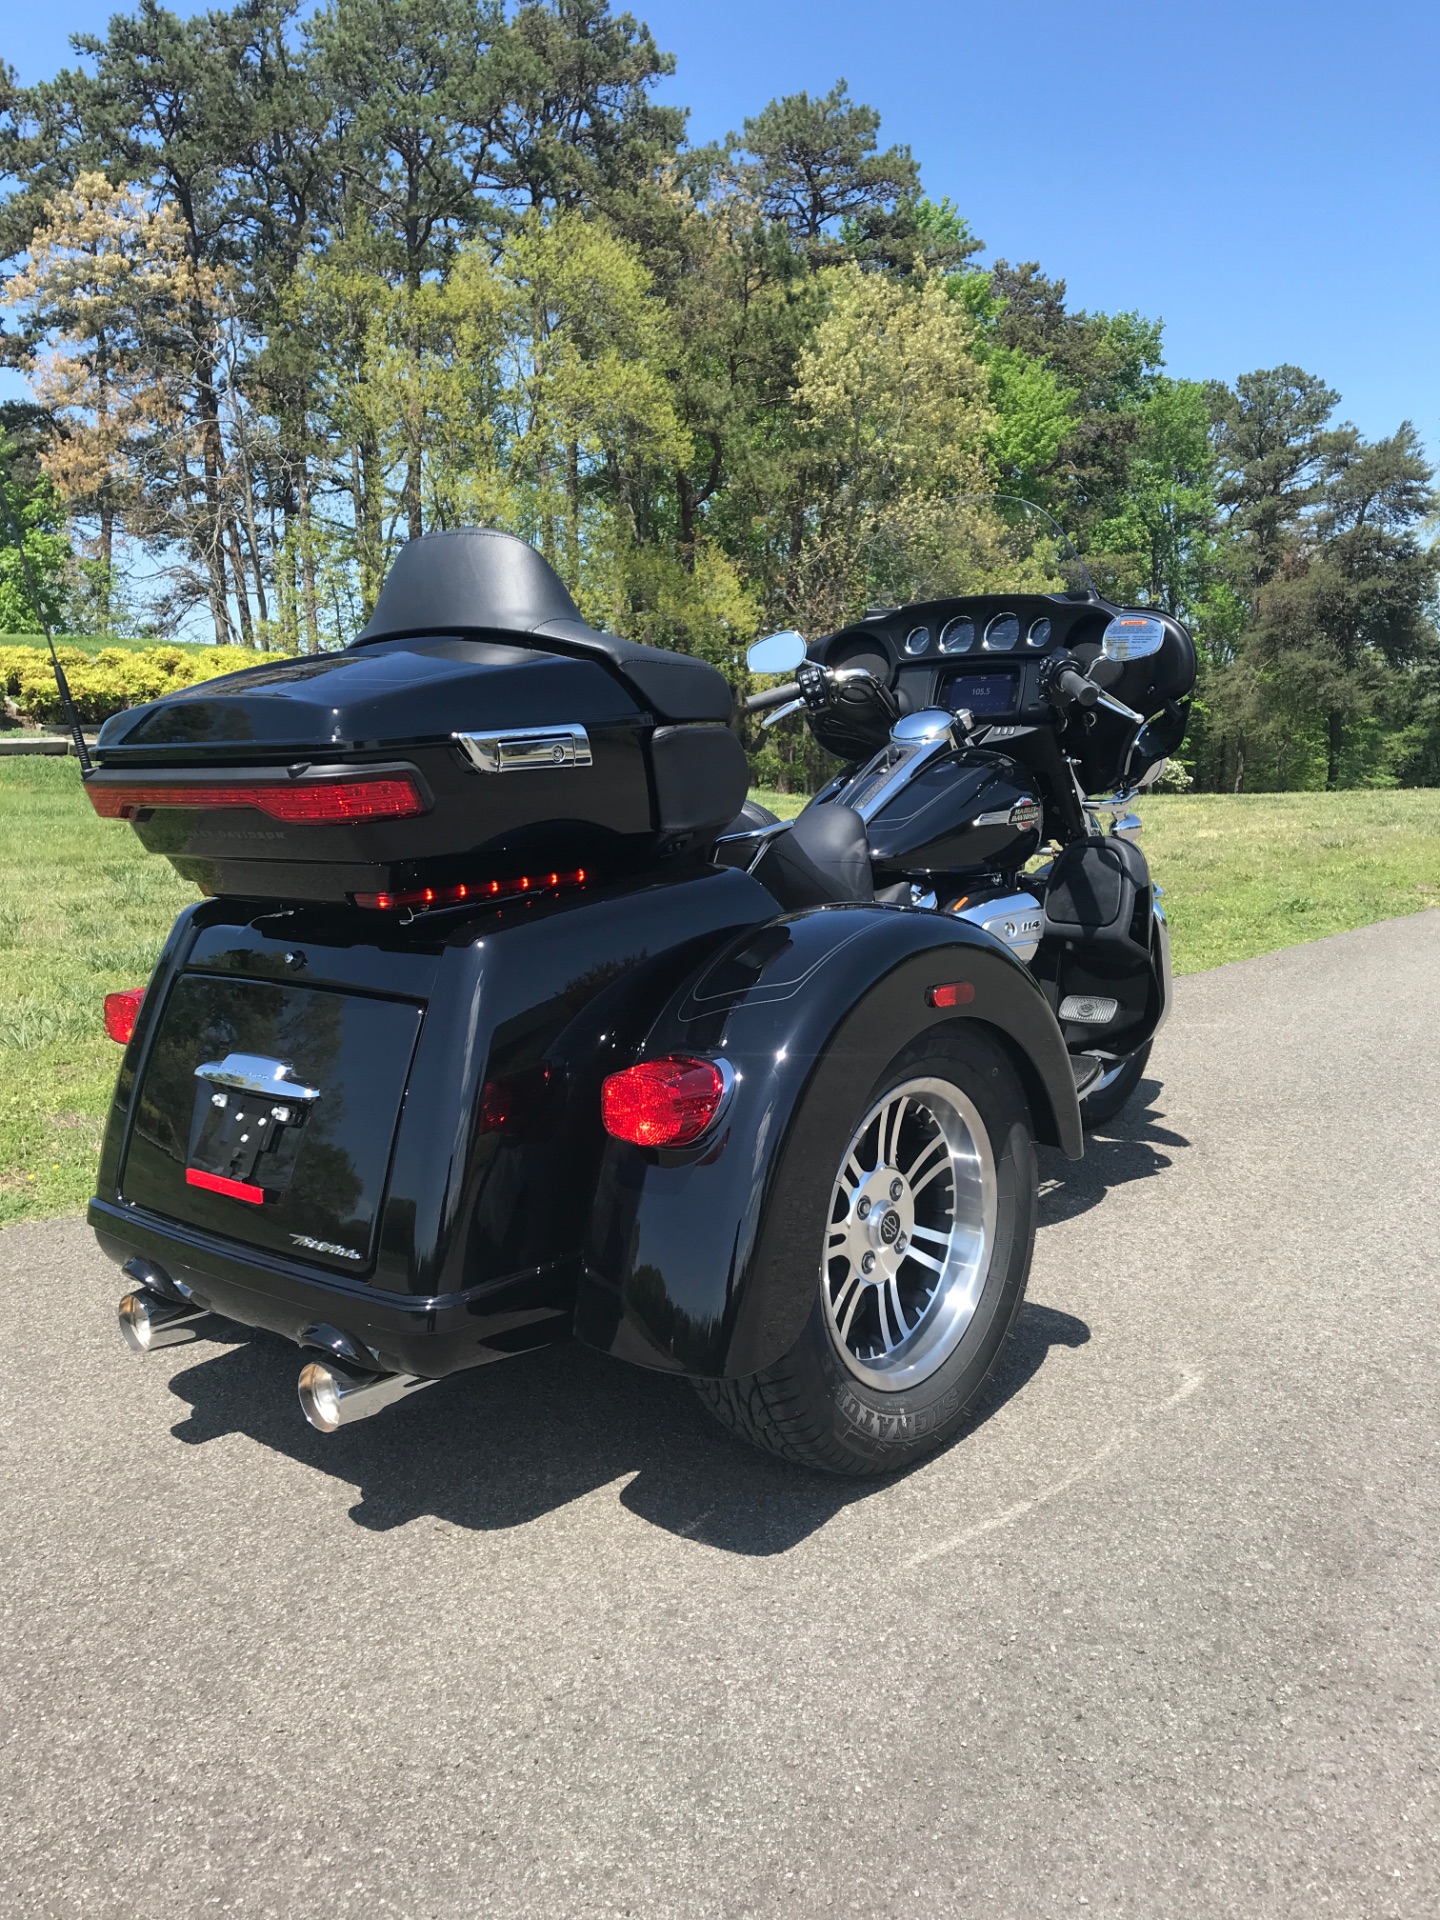 2023 Harley-Davidson TRI-GLIDE ULTRA in Morristown, Tennessee - Photo 3